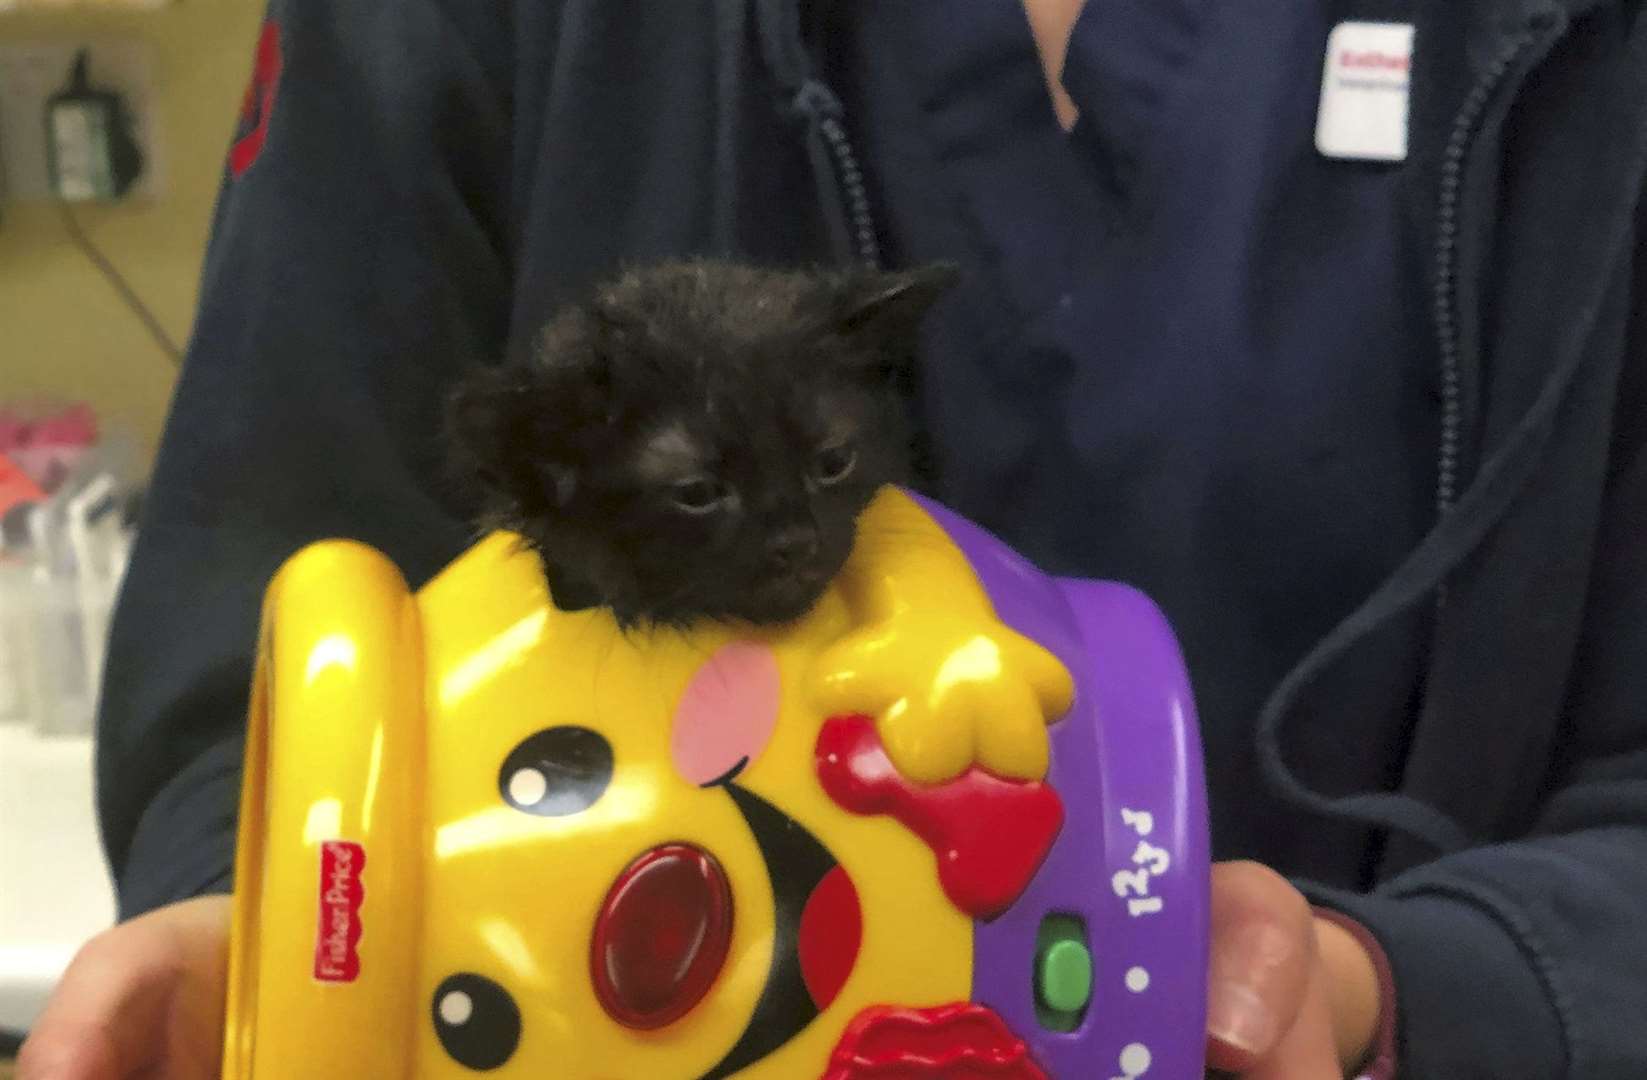 The kitten with its head stuck in the toy. Picture: SWNS